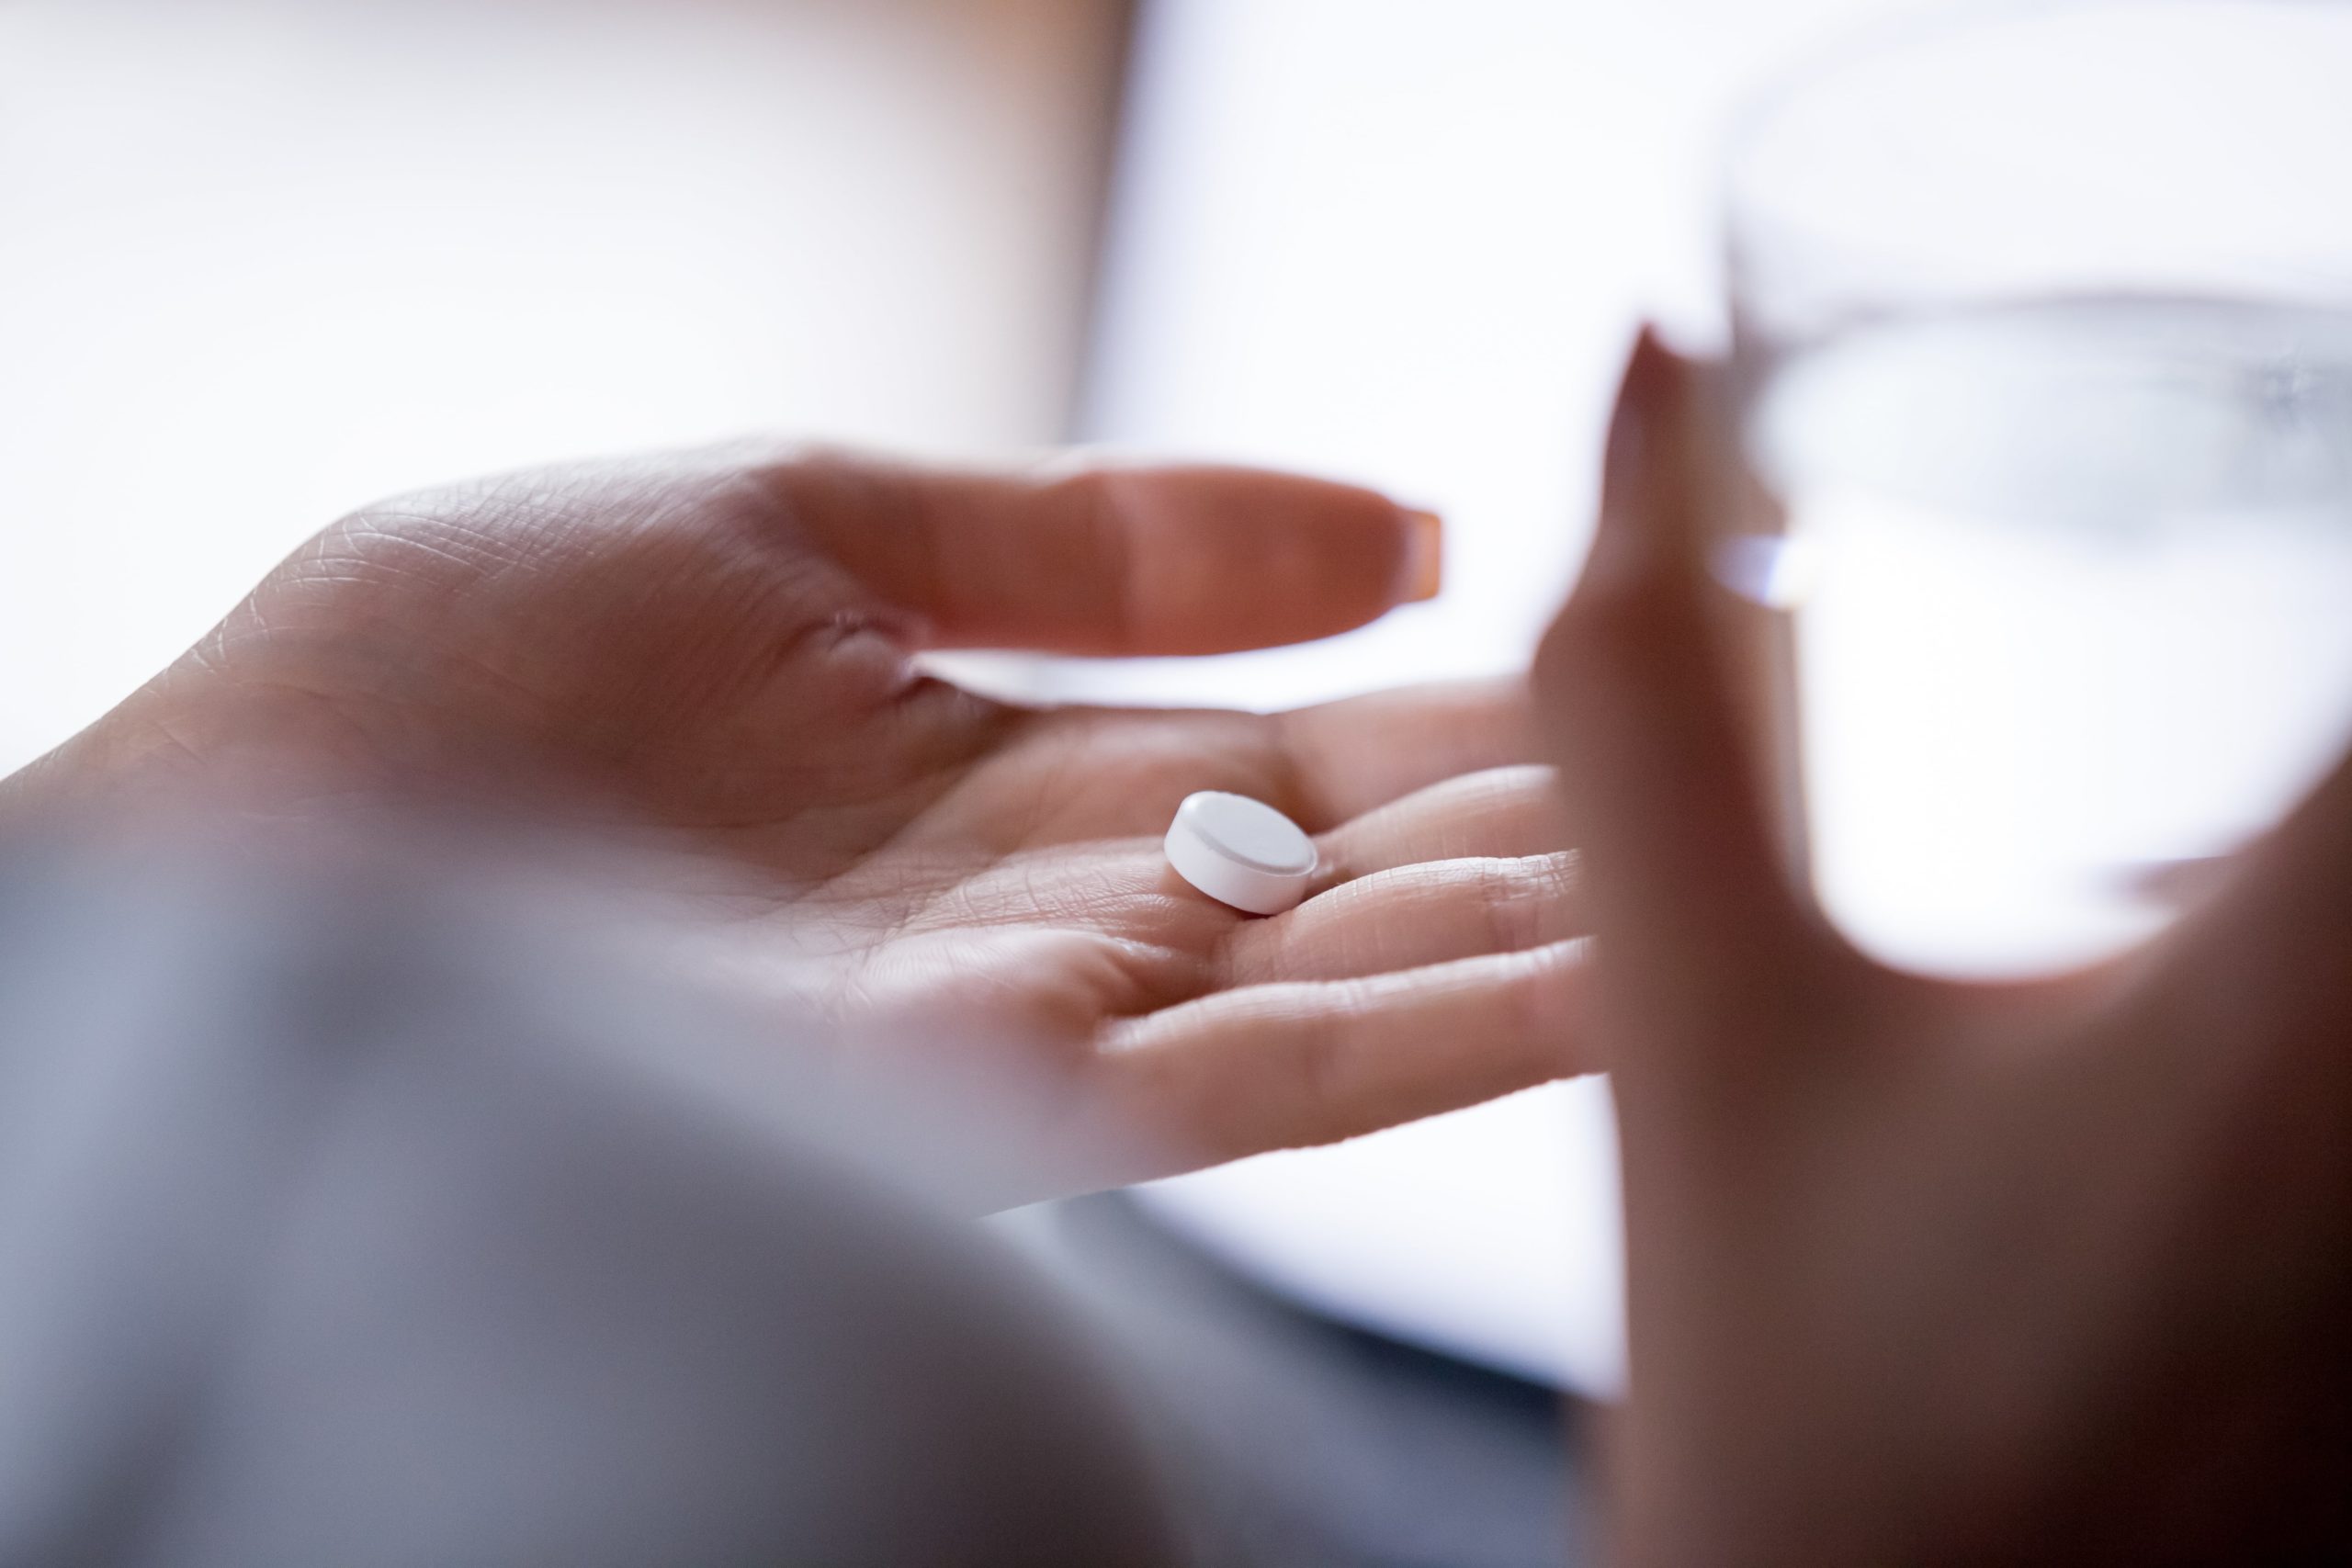 open hand holding medication in a white tablet form